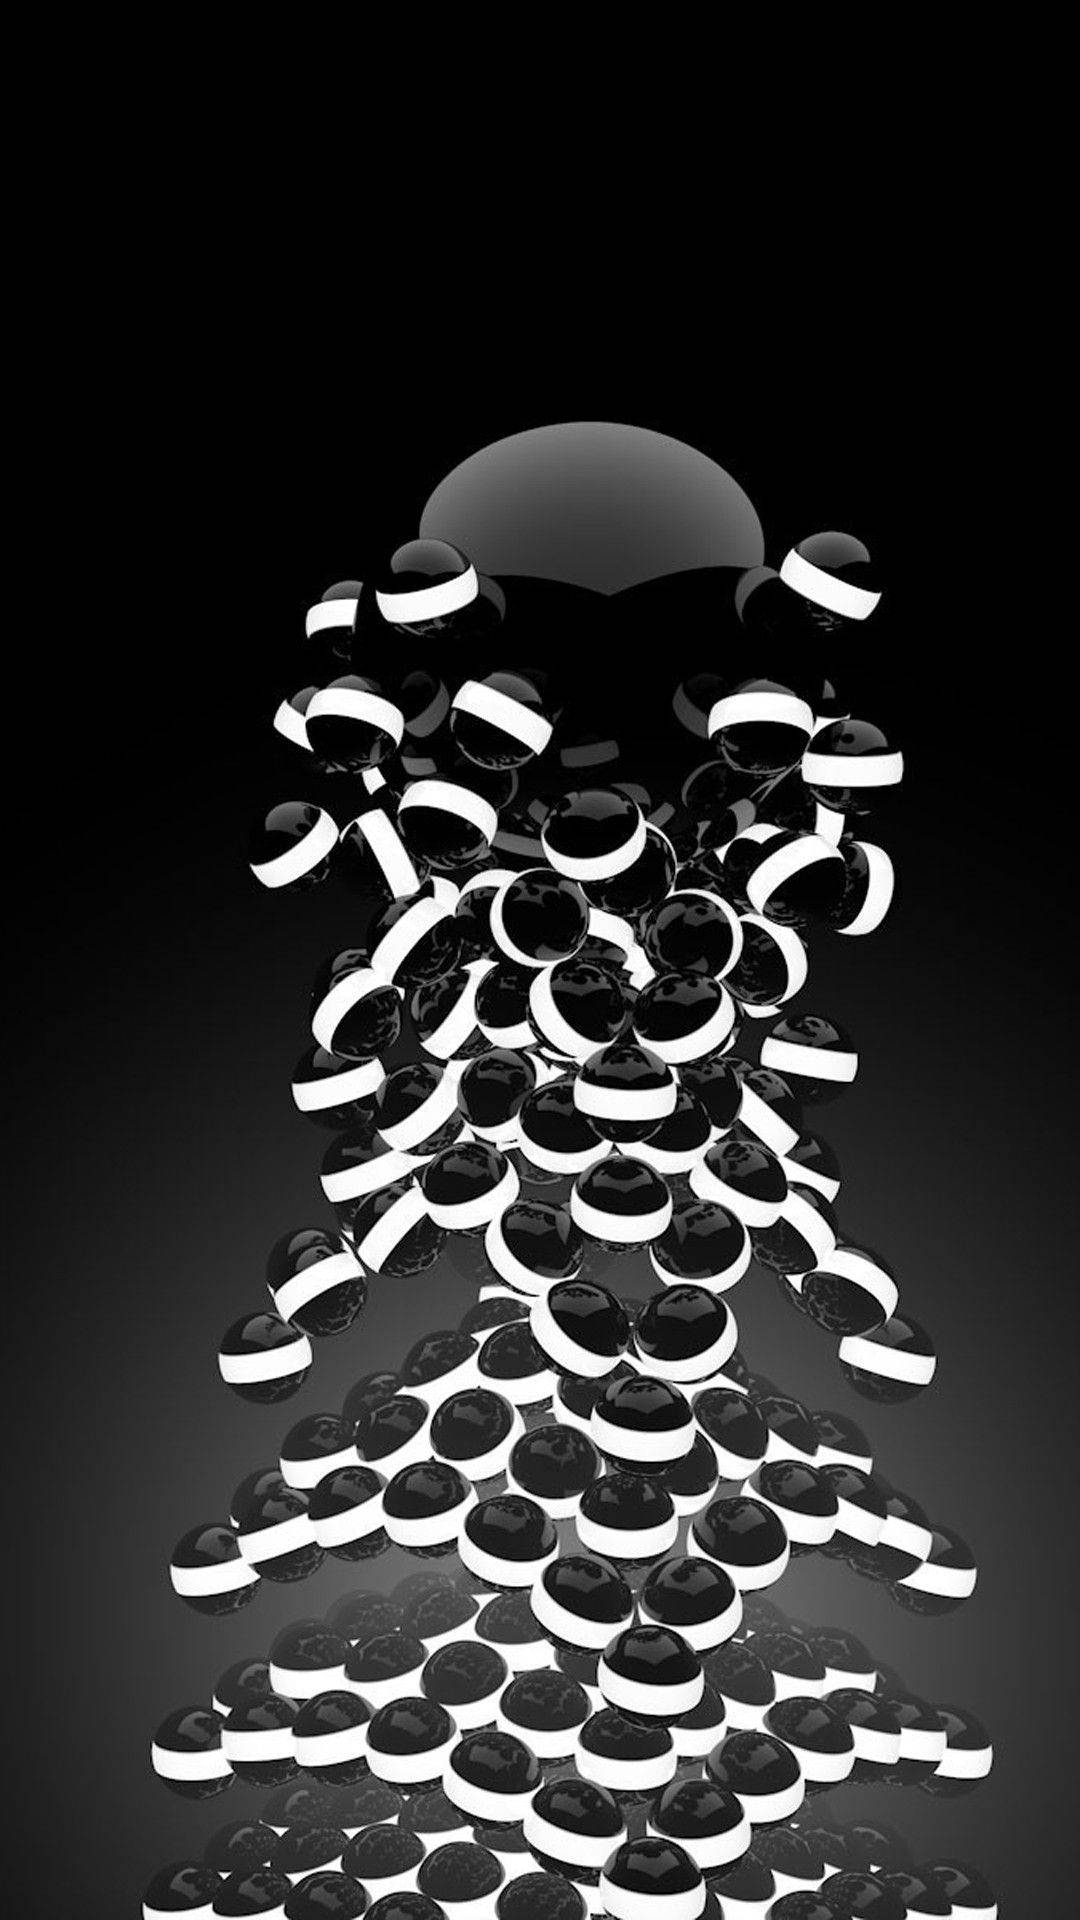 3d Iphone Black And White Spheres Wallpaper